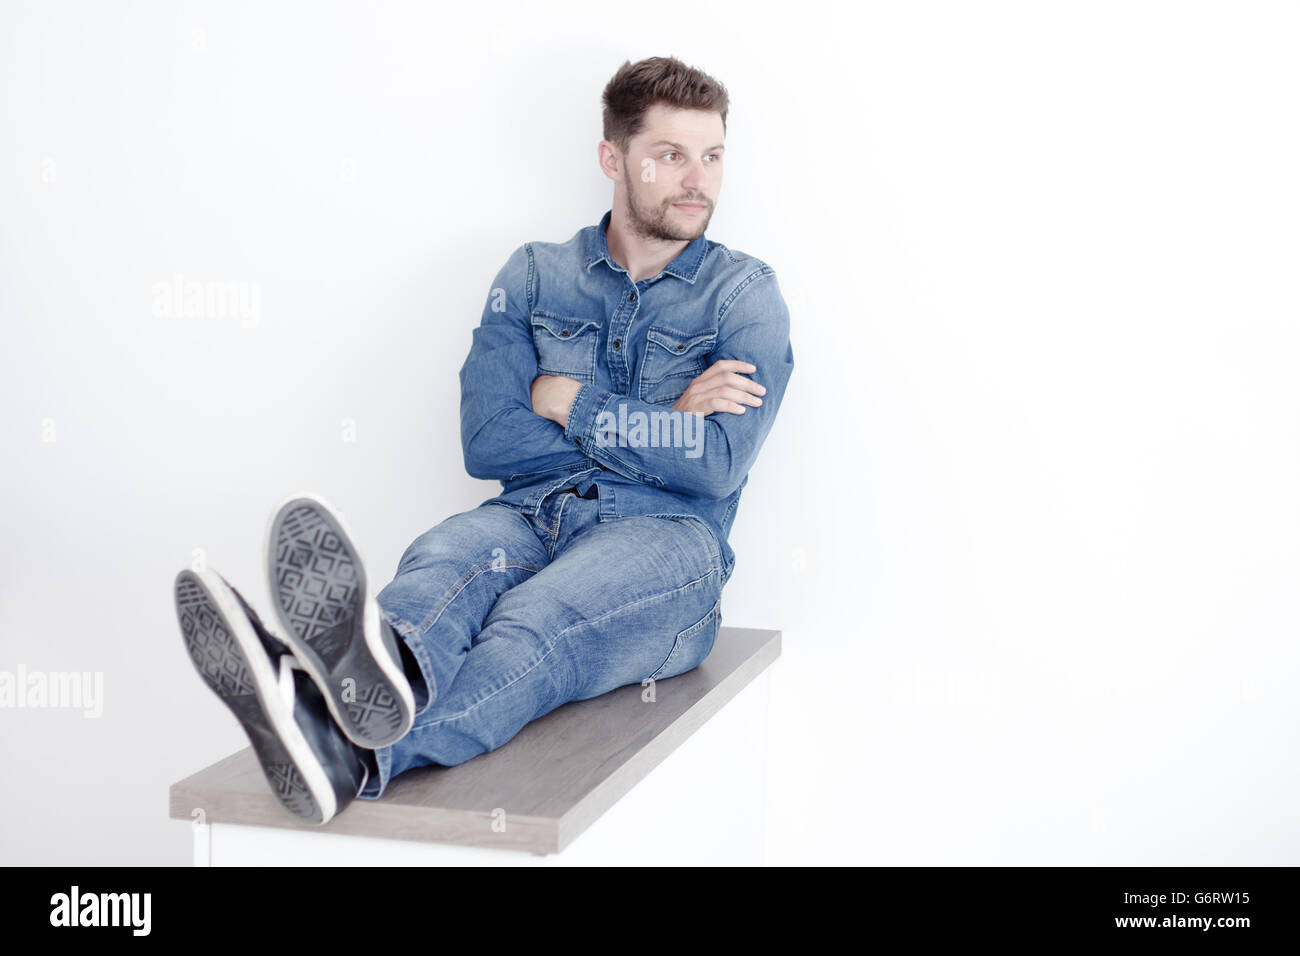 Portrait of a confident man in a denim shirt. A man sits on a wooden board. Stock Photo